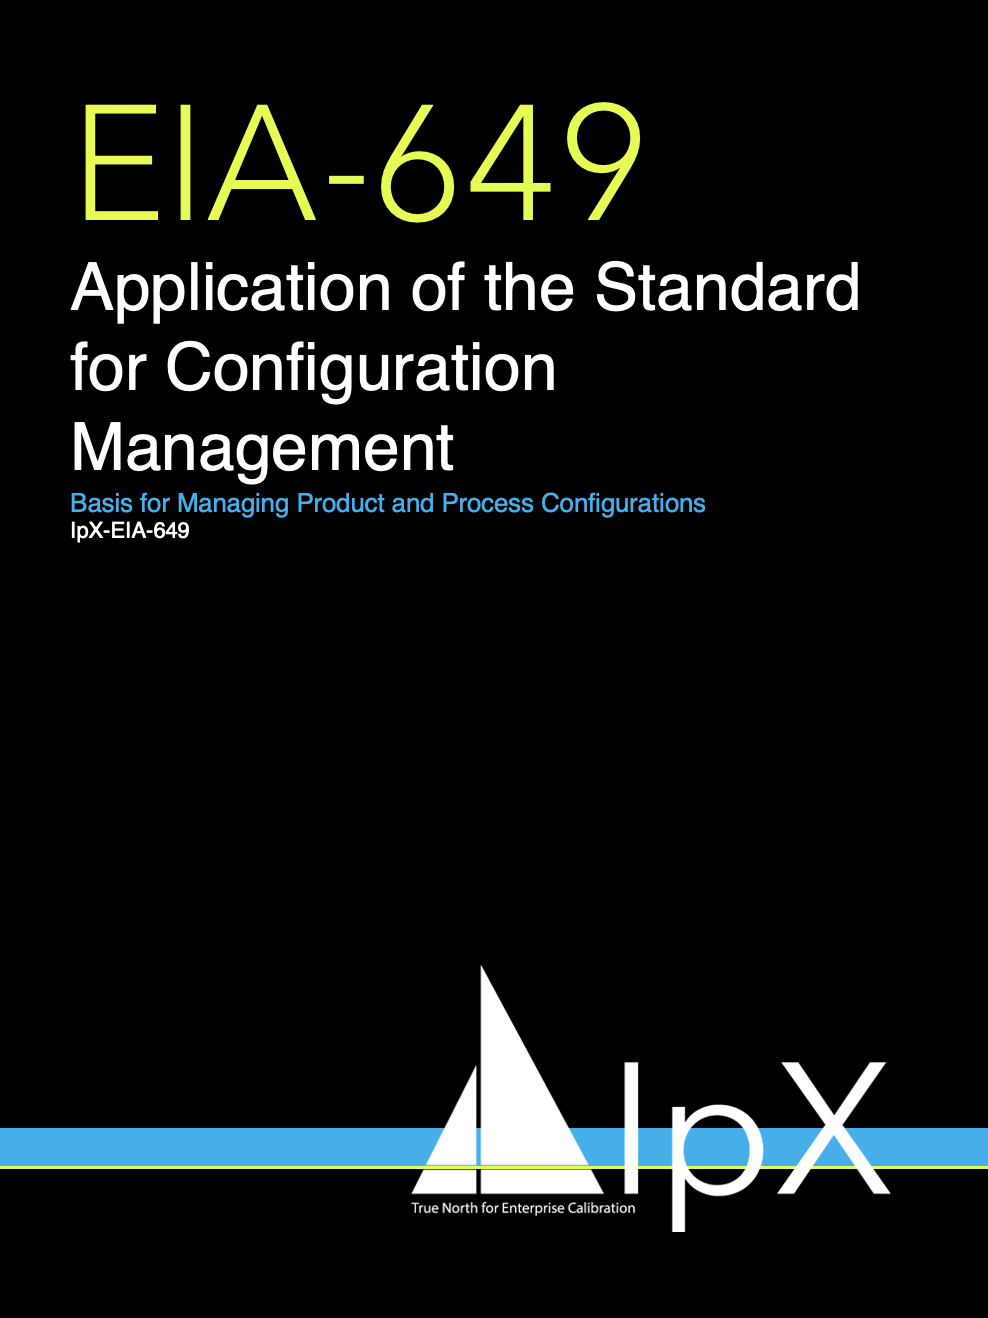 EIA649 Application of the Standard for Configuration Management